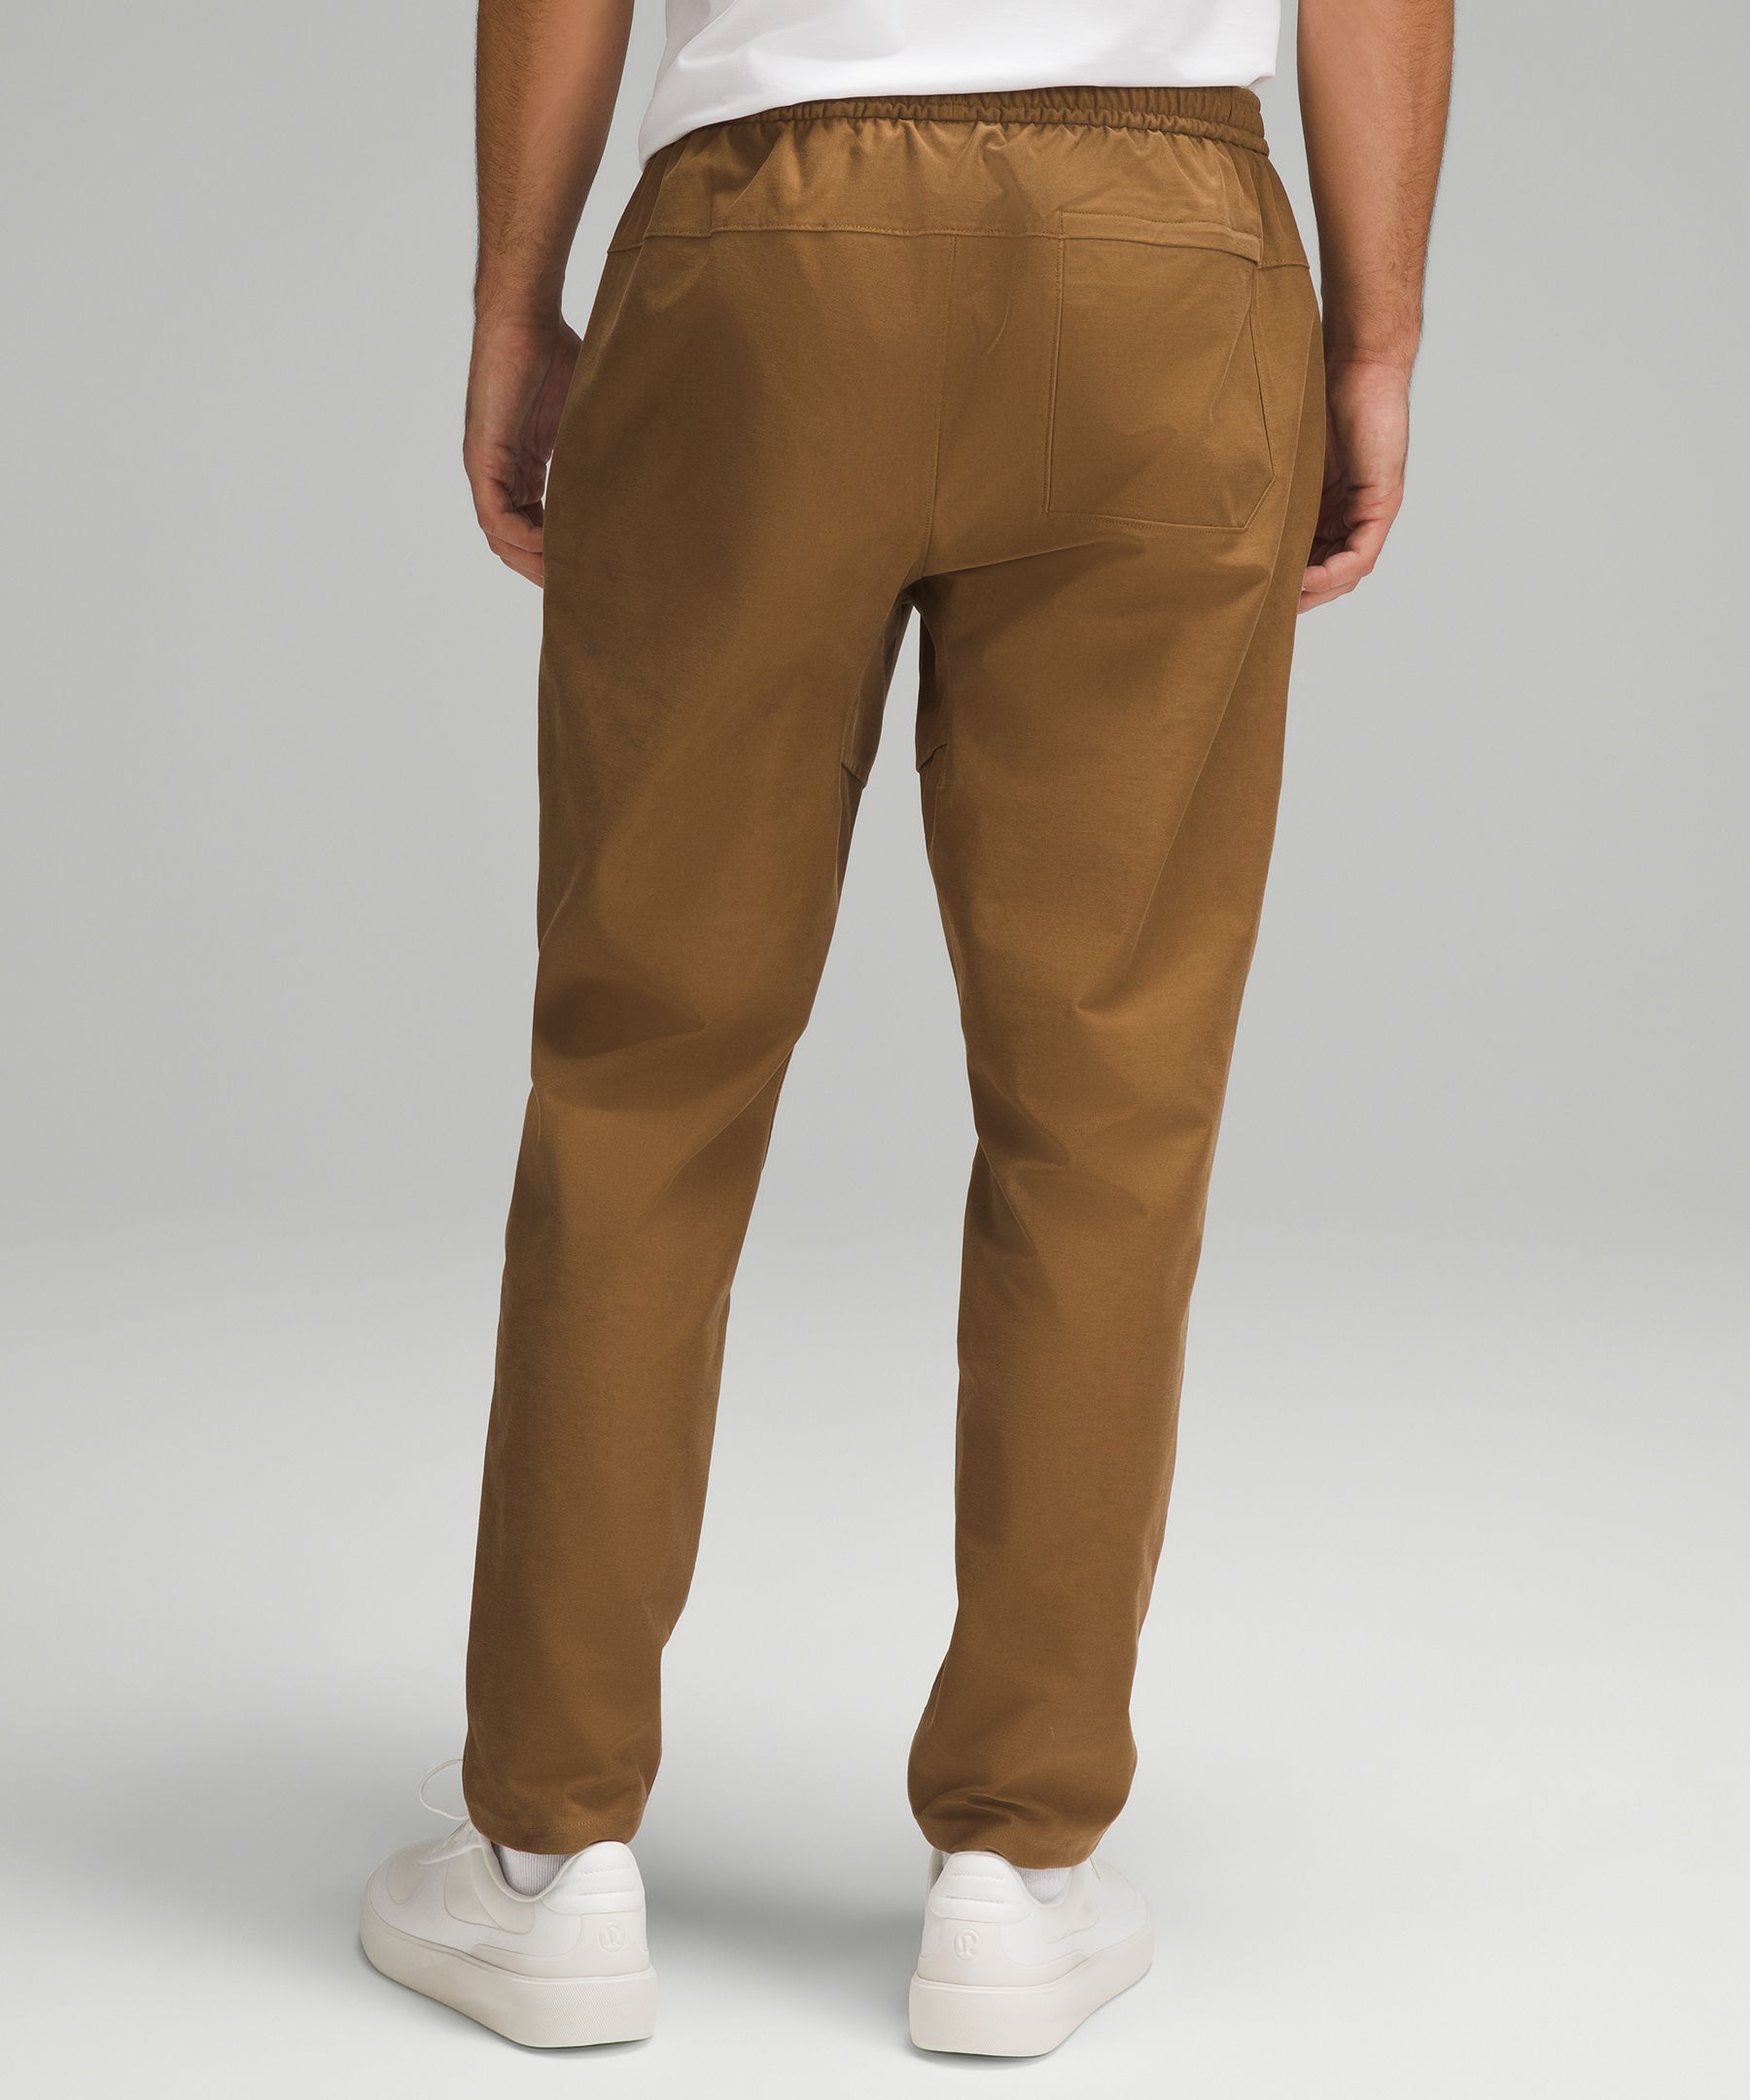 Utilitech Pull-On Classic-Fit Pant, Men's Joggers